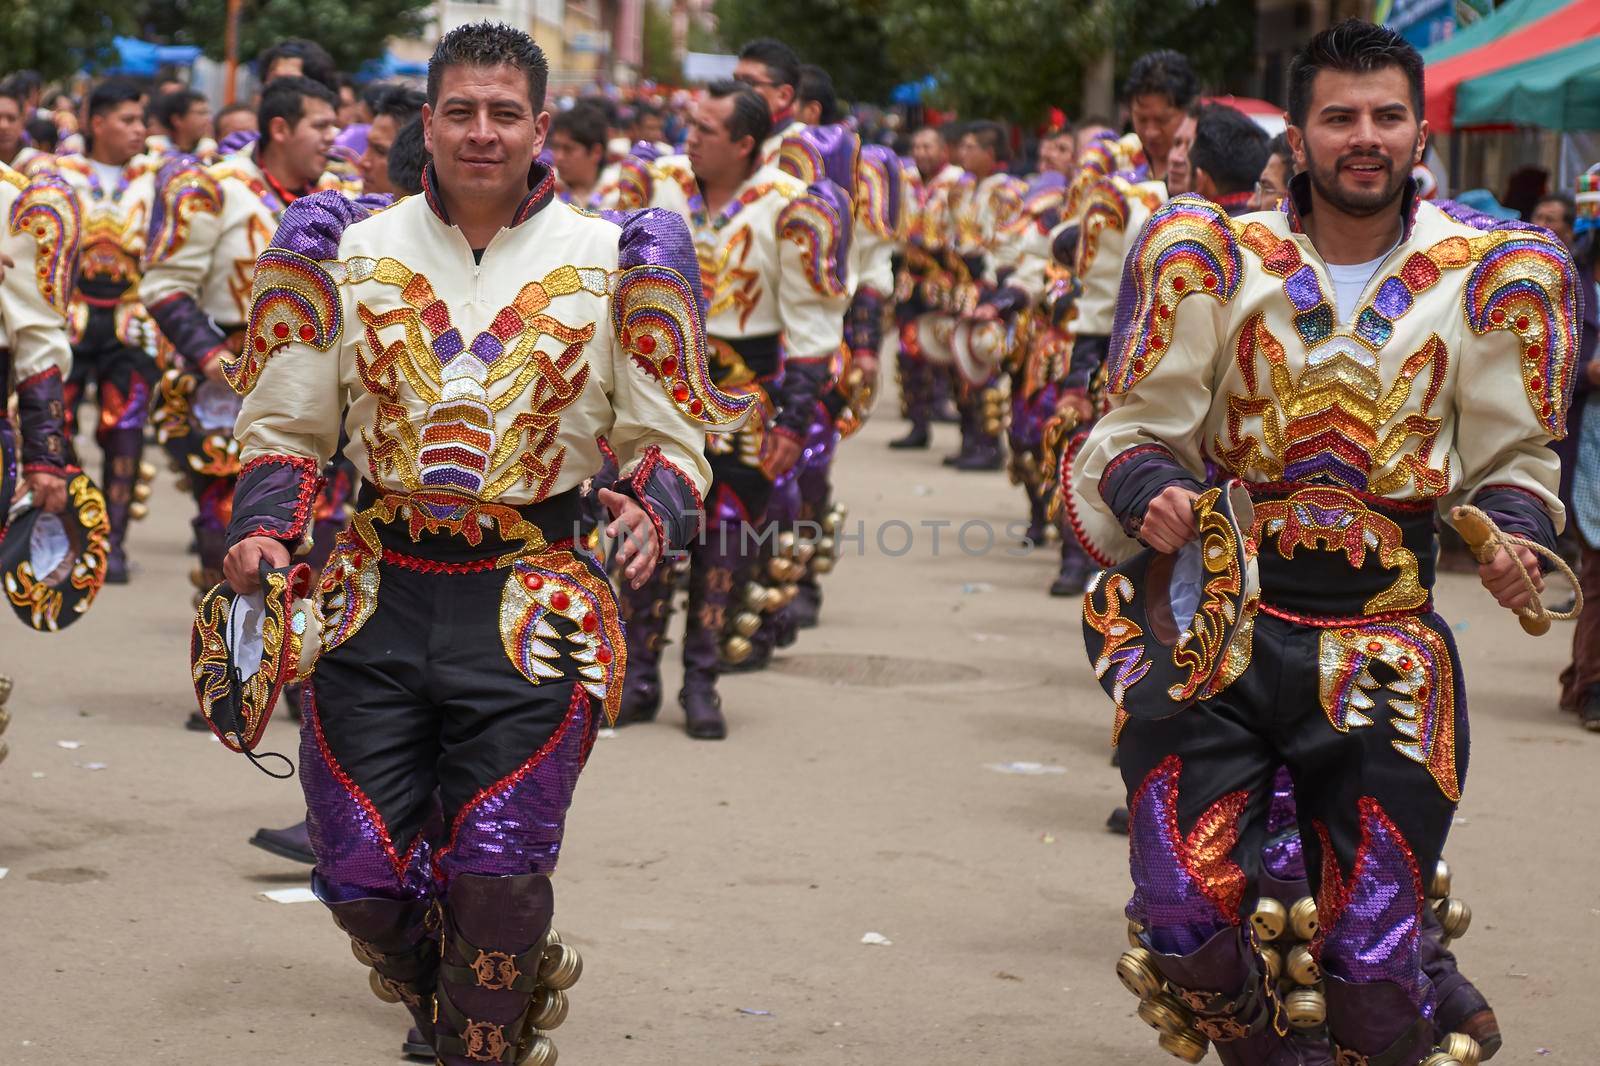 Oruro, Bolivia - February 26, 2017: Caporales dancers in ornate costumes performing as they parade through the mining city of Oruro on the Altiplano of Bolivia during the annual carnival.